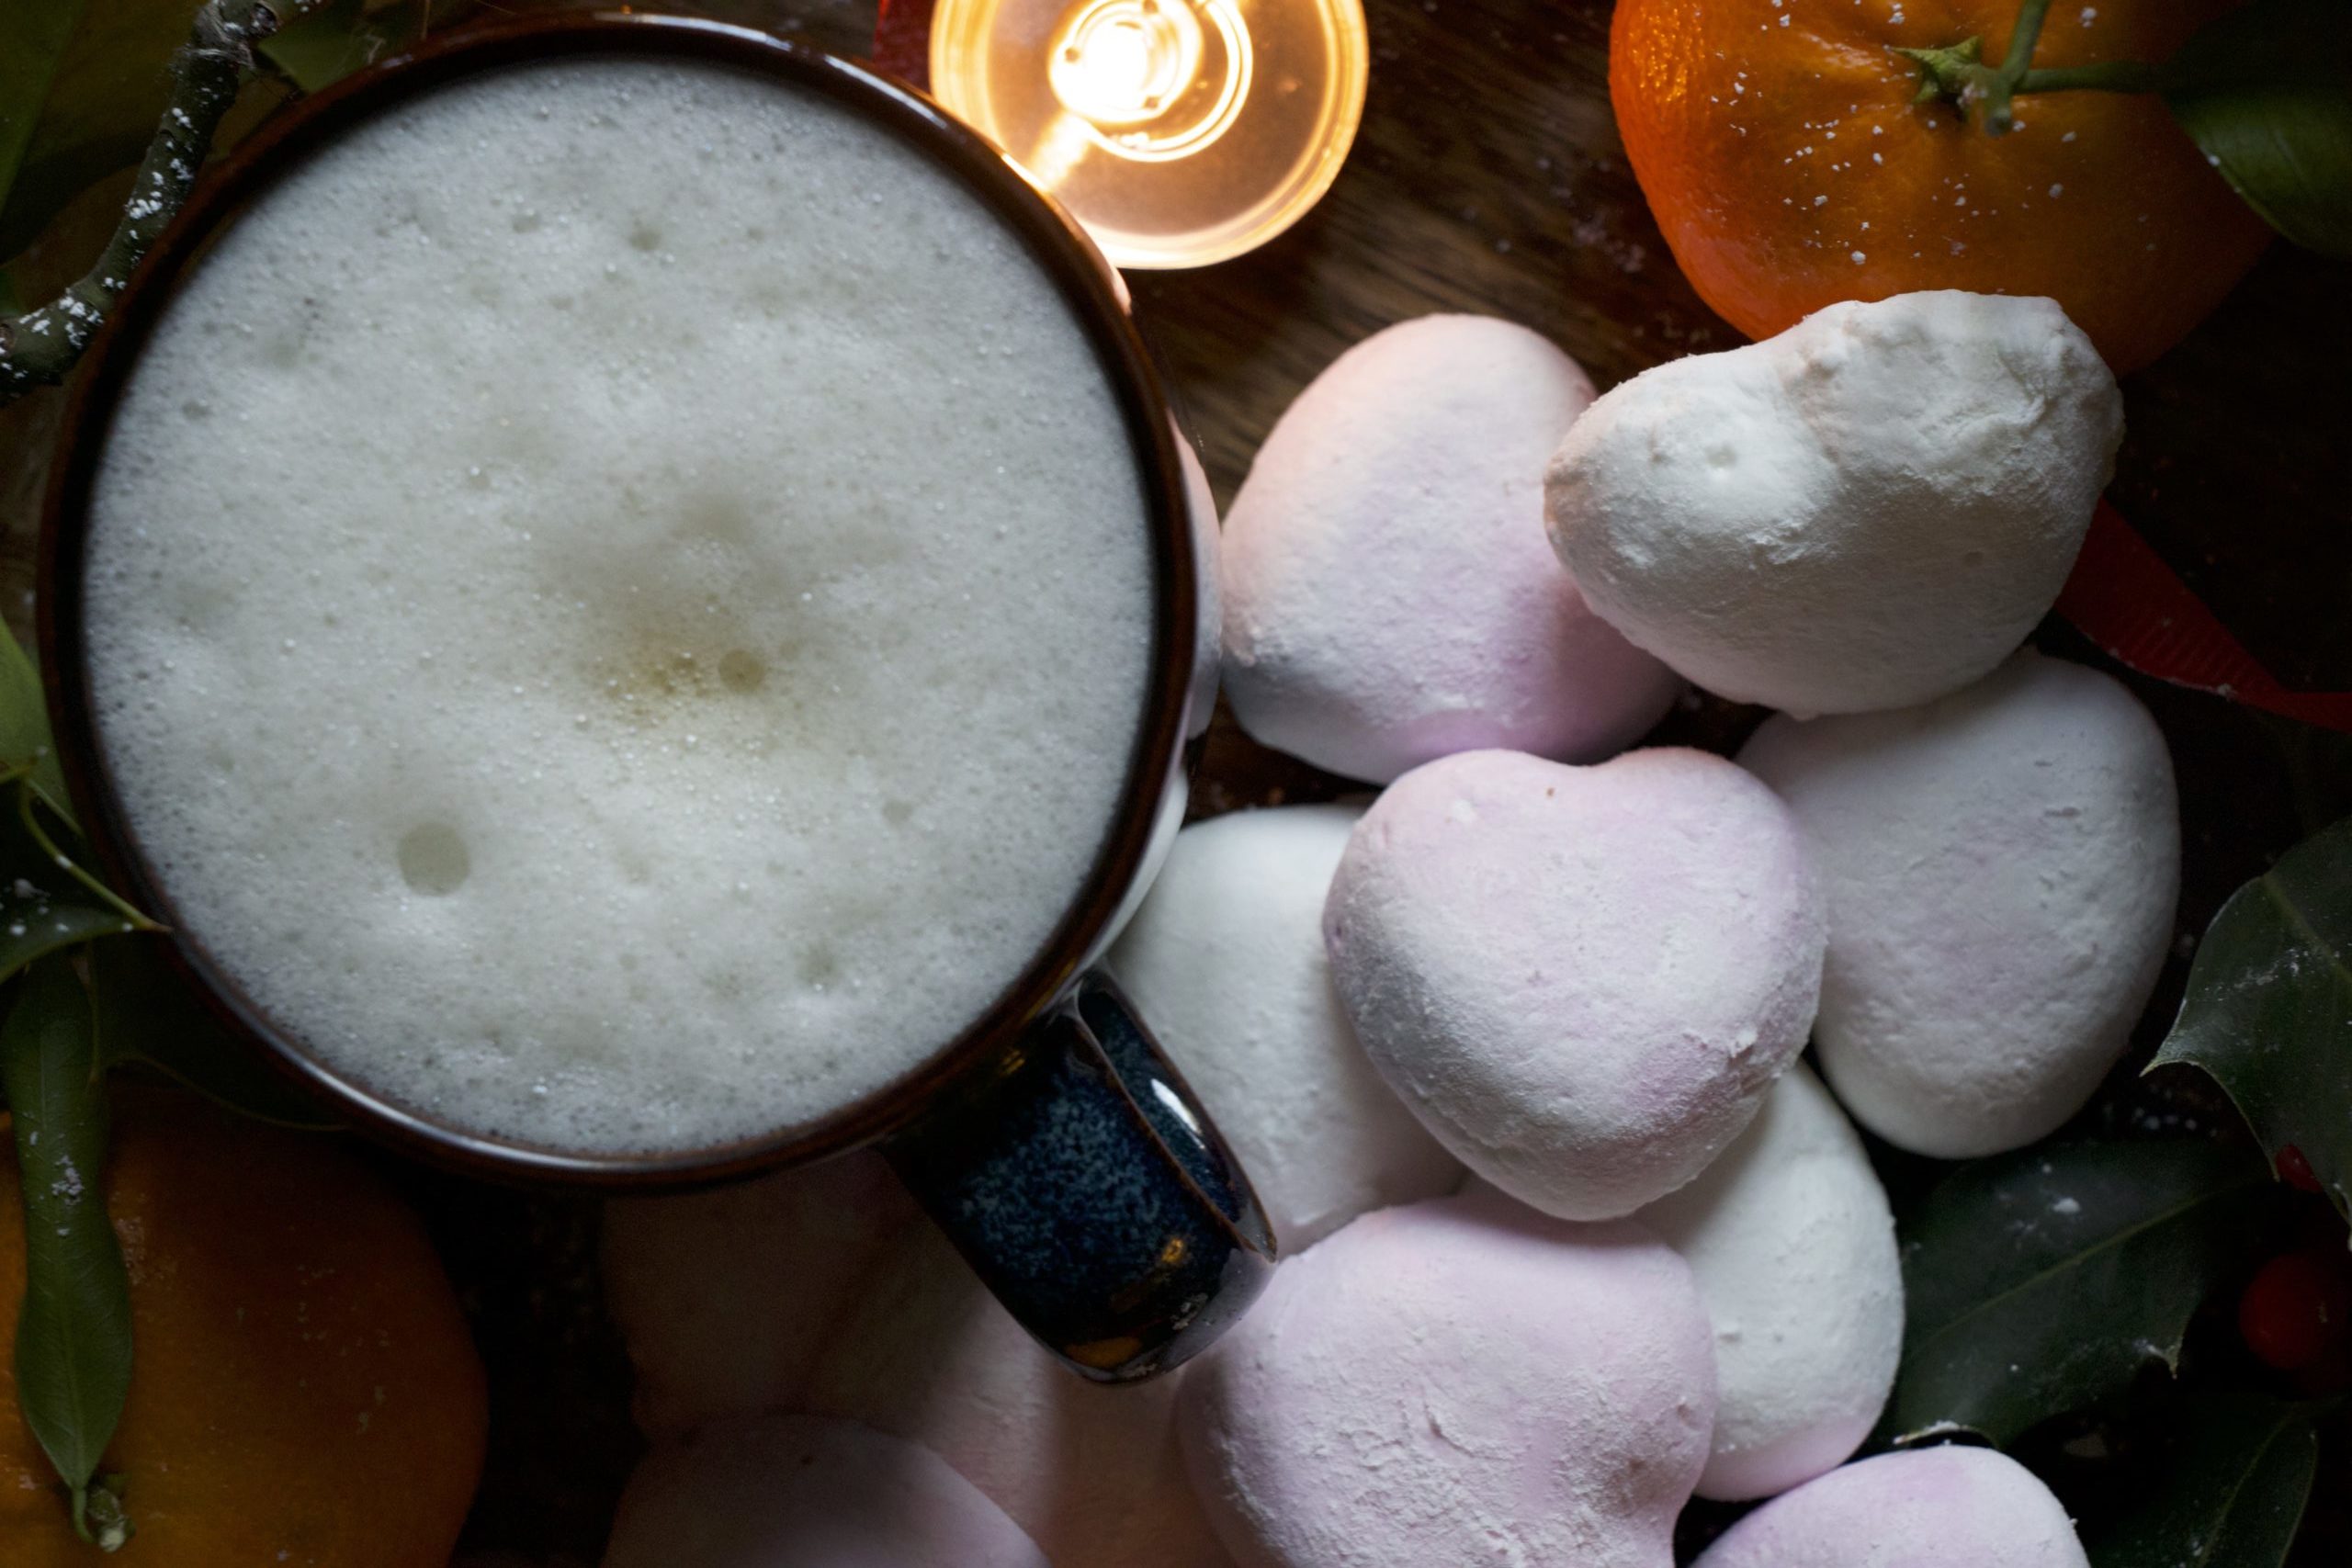 Mix of heart marshmallows on the table with a coffee cup on the side